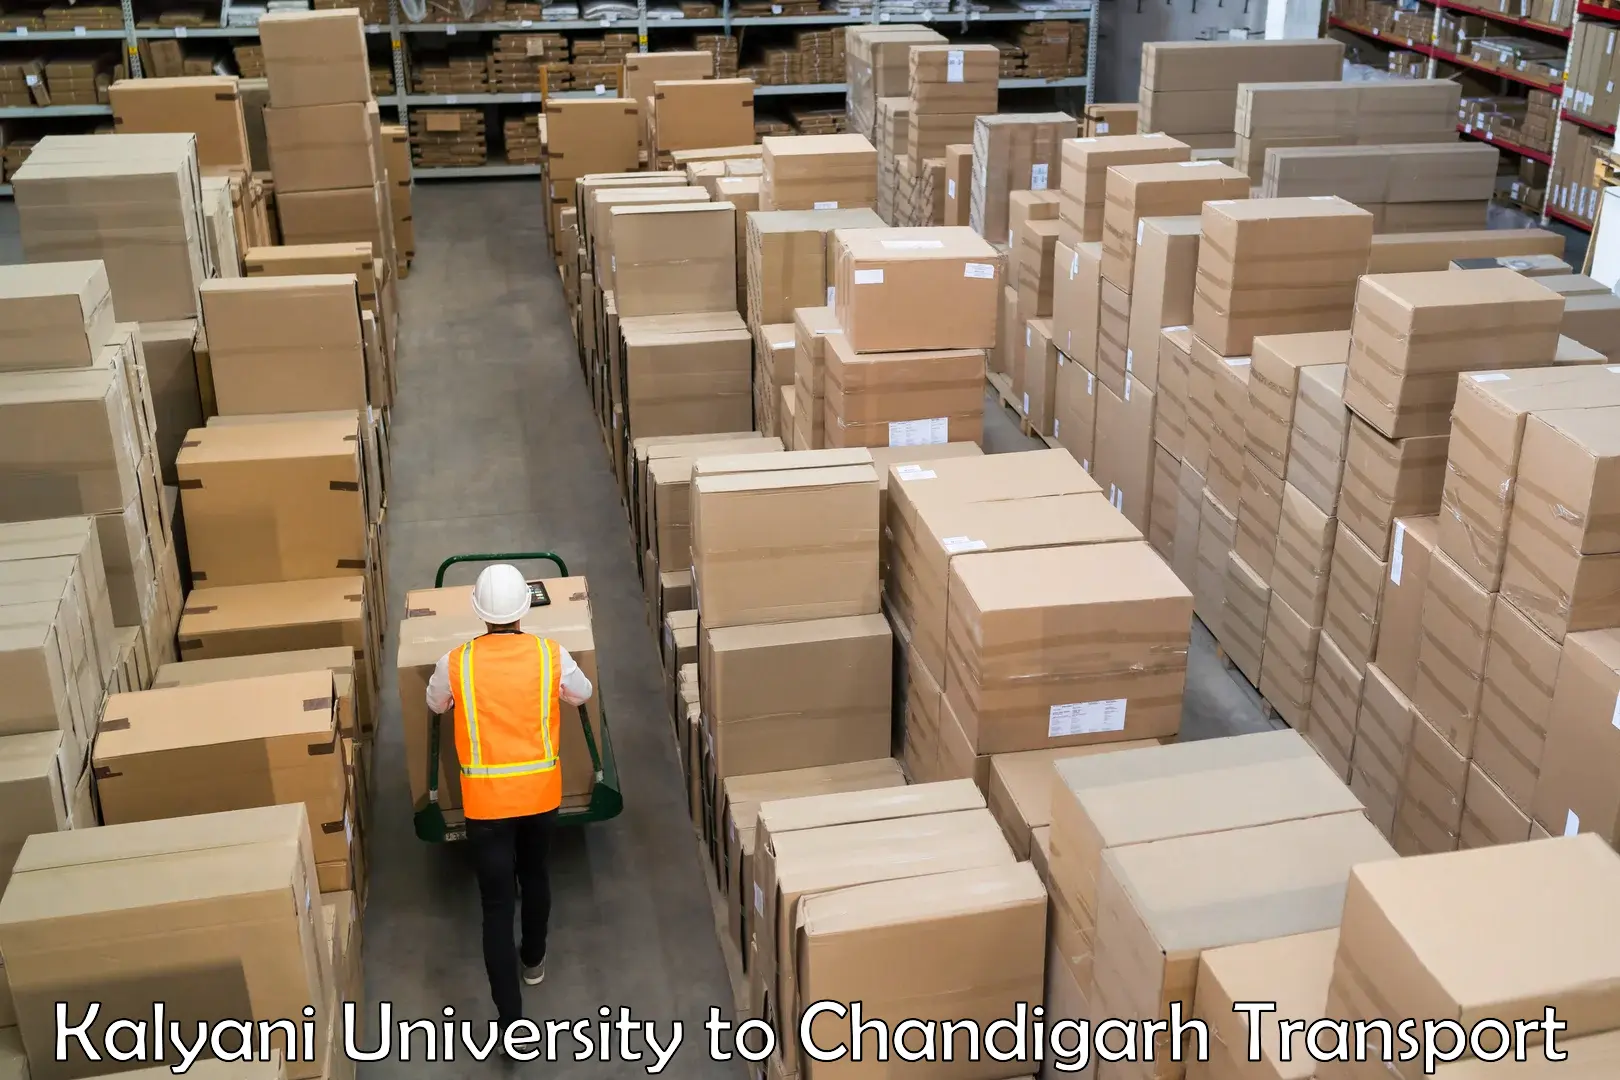 Package delivery services Kalyani University to Chandigarh